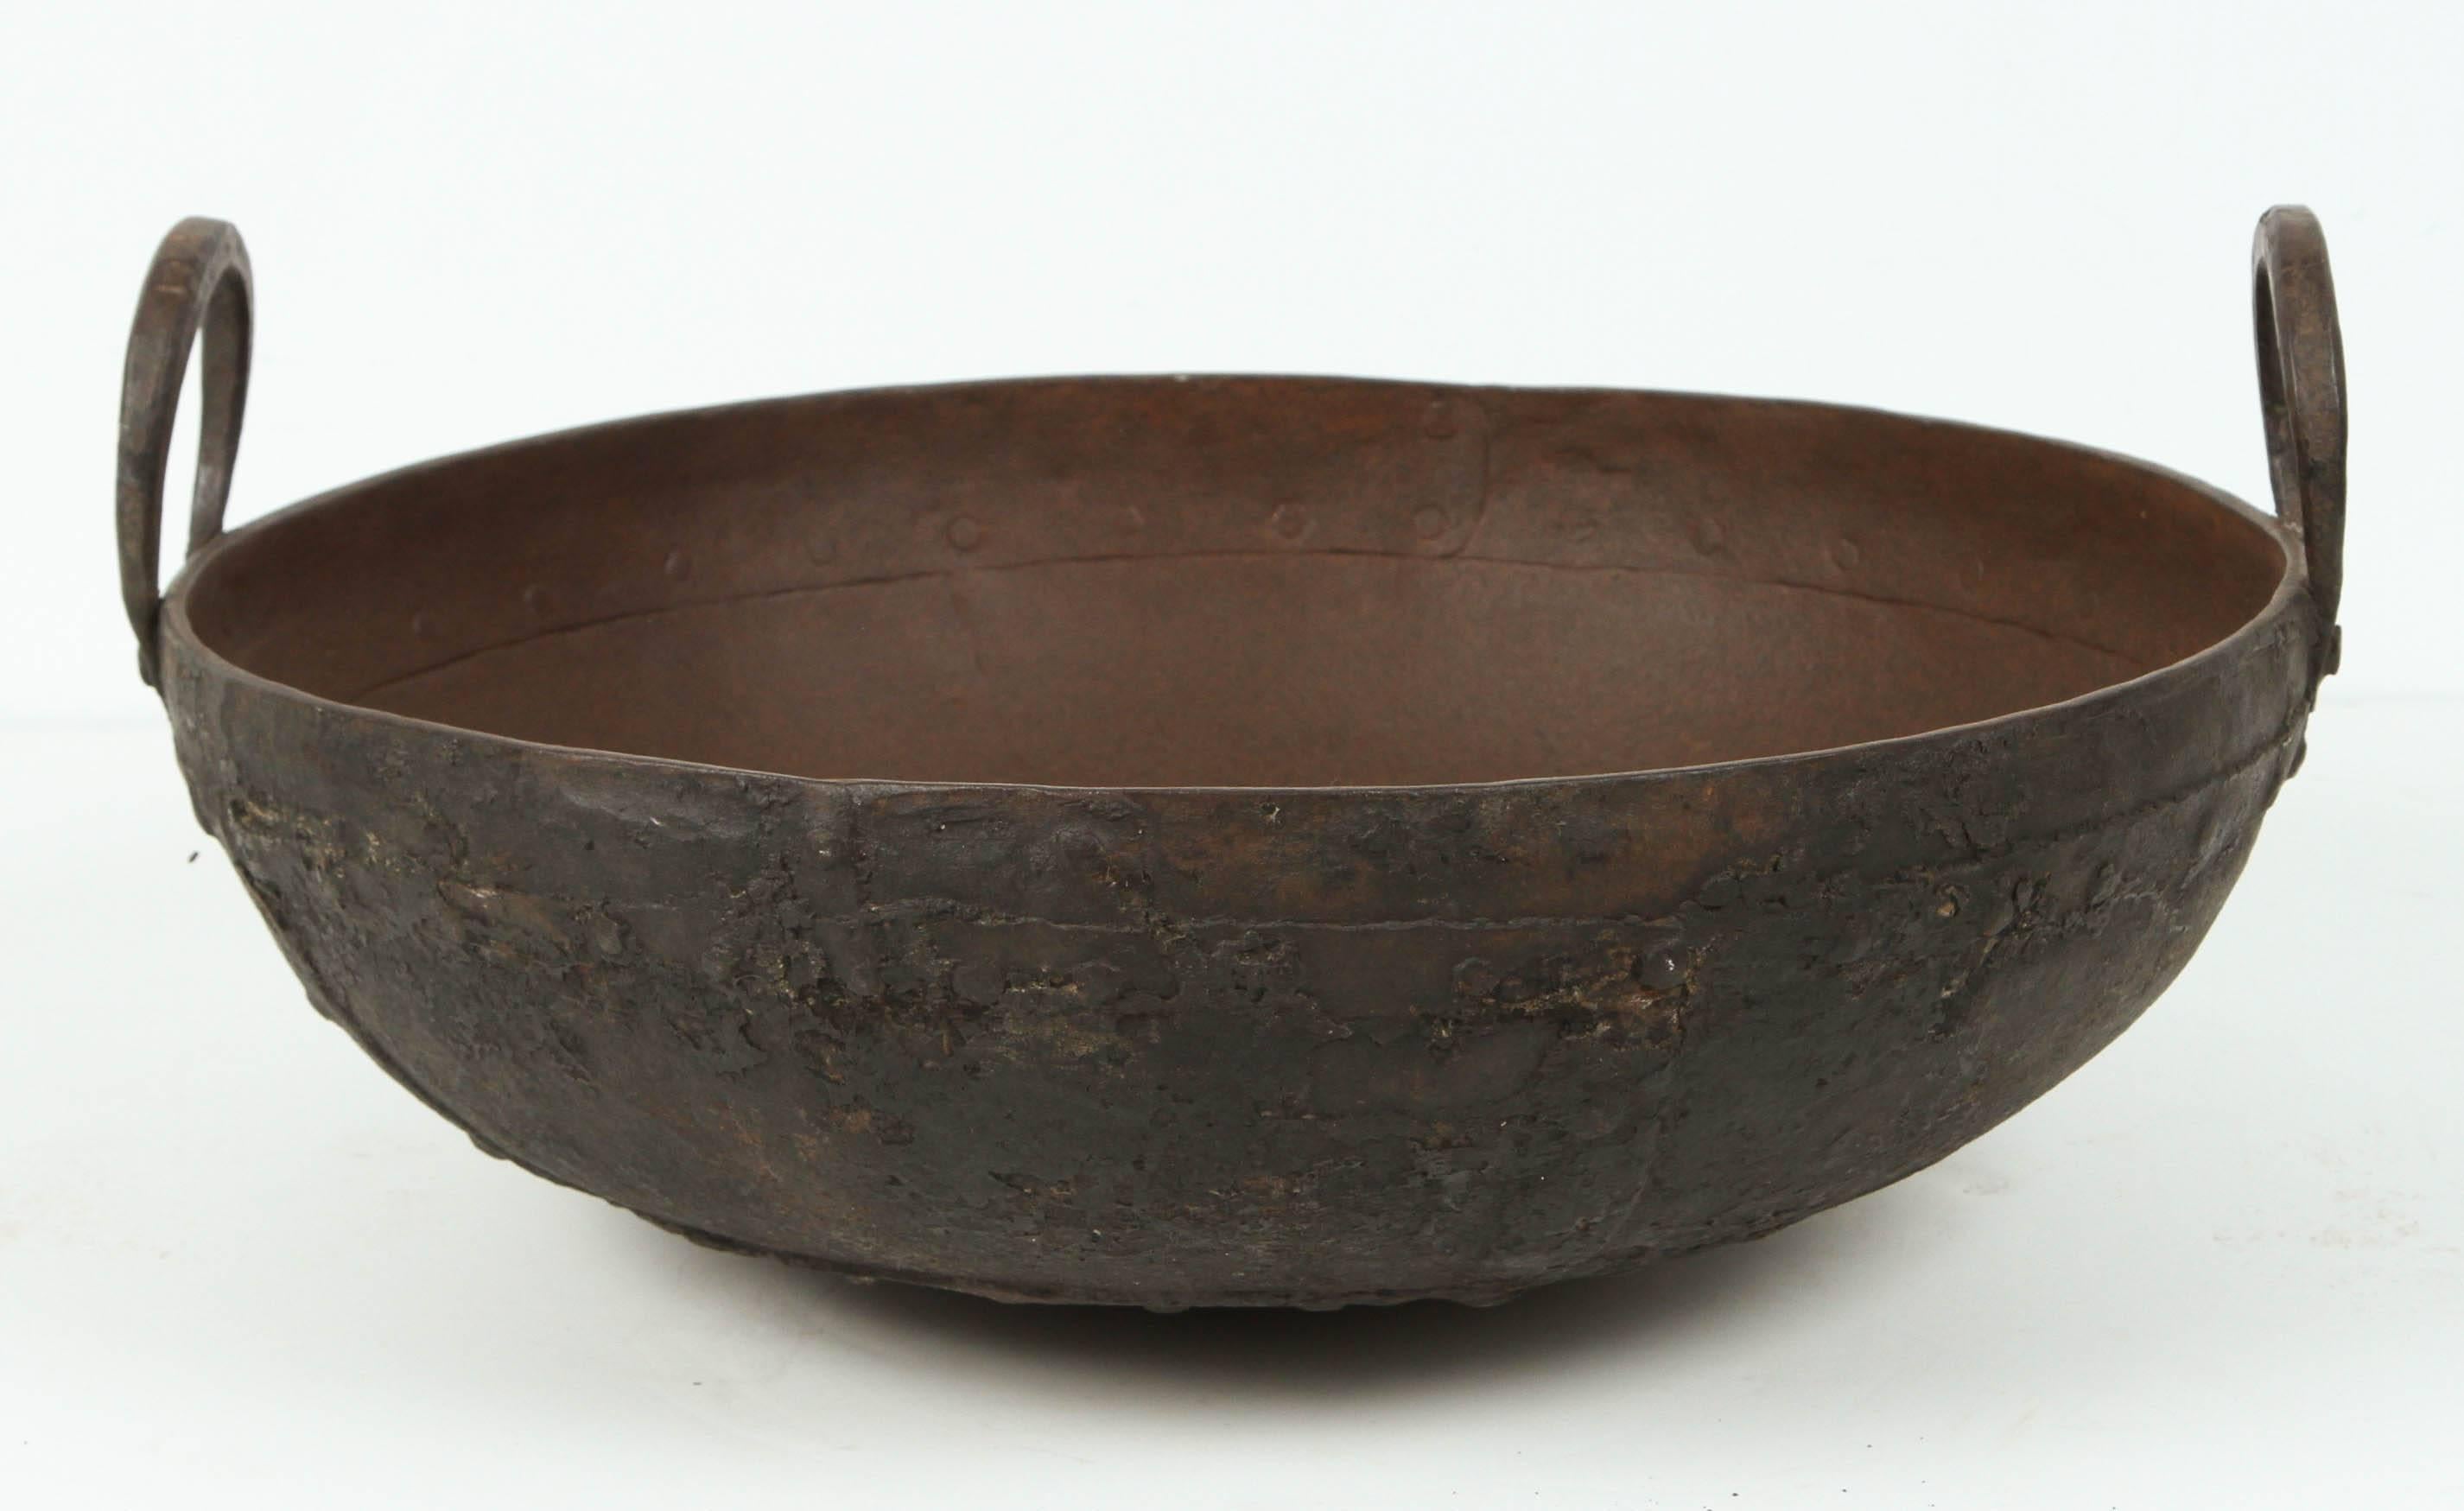 Large metal iron pots from Southern India known locally as an urli. 
These Pots were placed directly on a fire and large meals were prepared for special events.
They make great garden ponds, jardinieres, fire pits and other outdoor uses.
Hand-tooled